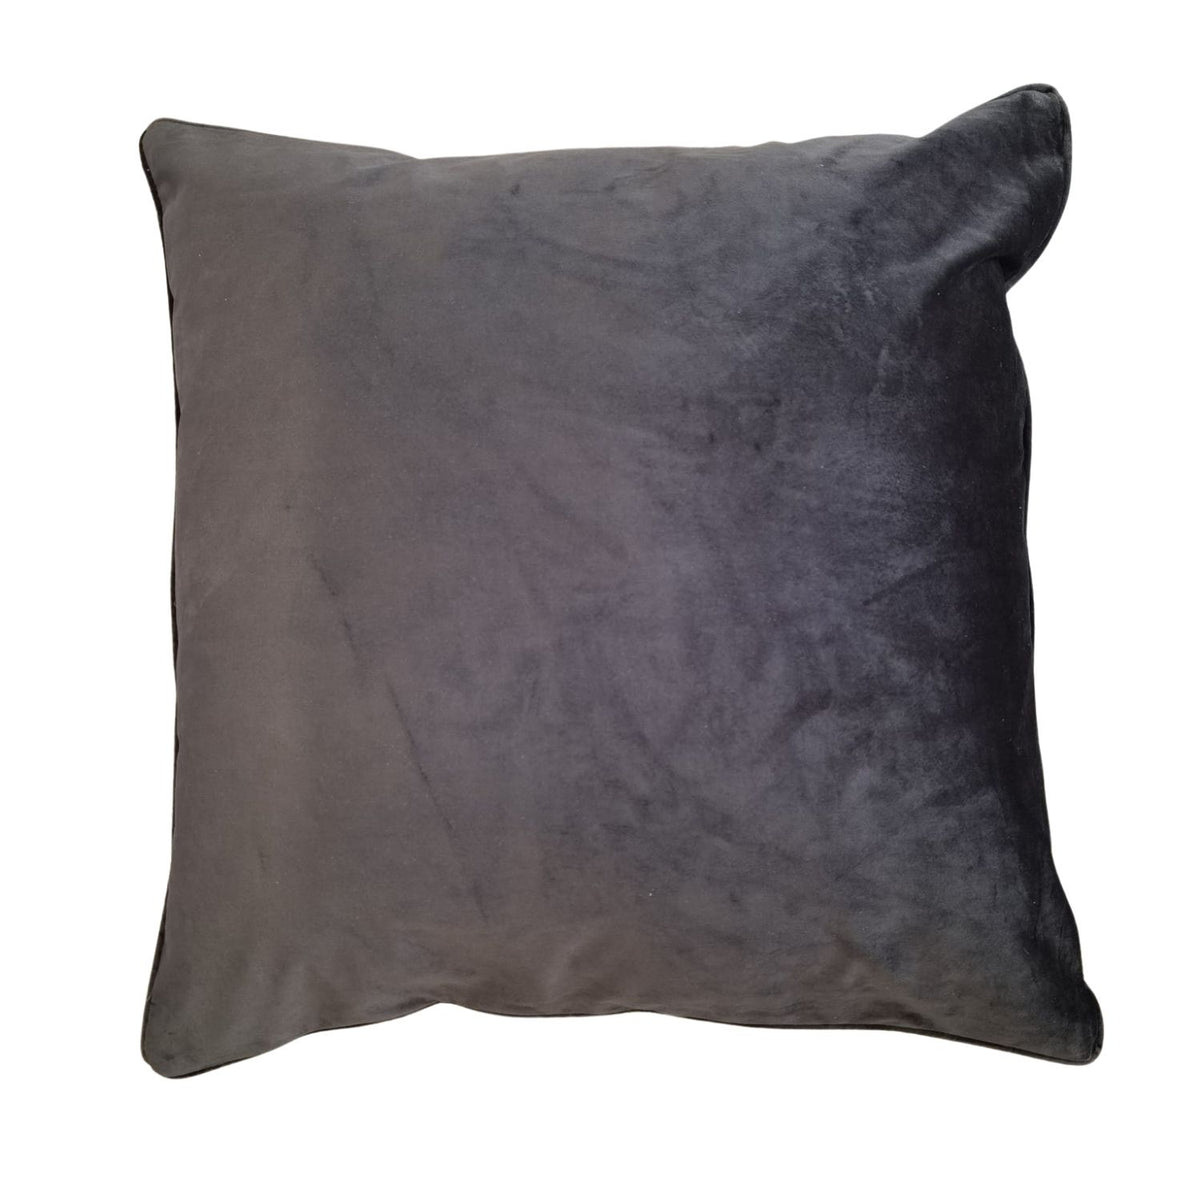 Printed Piped Cushion Cover - 24x24''